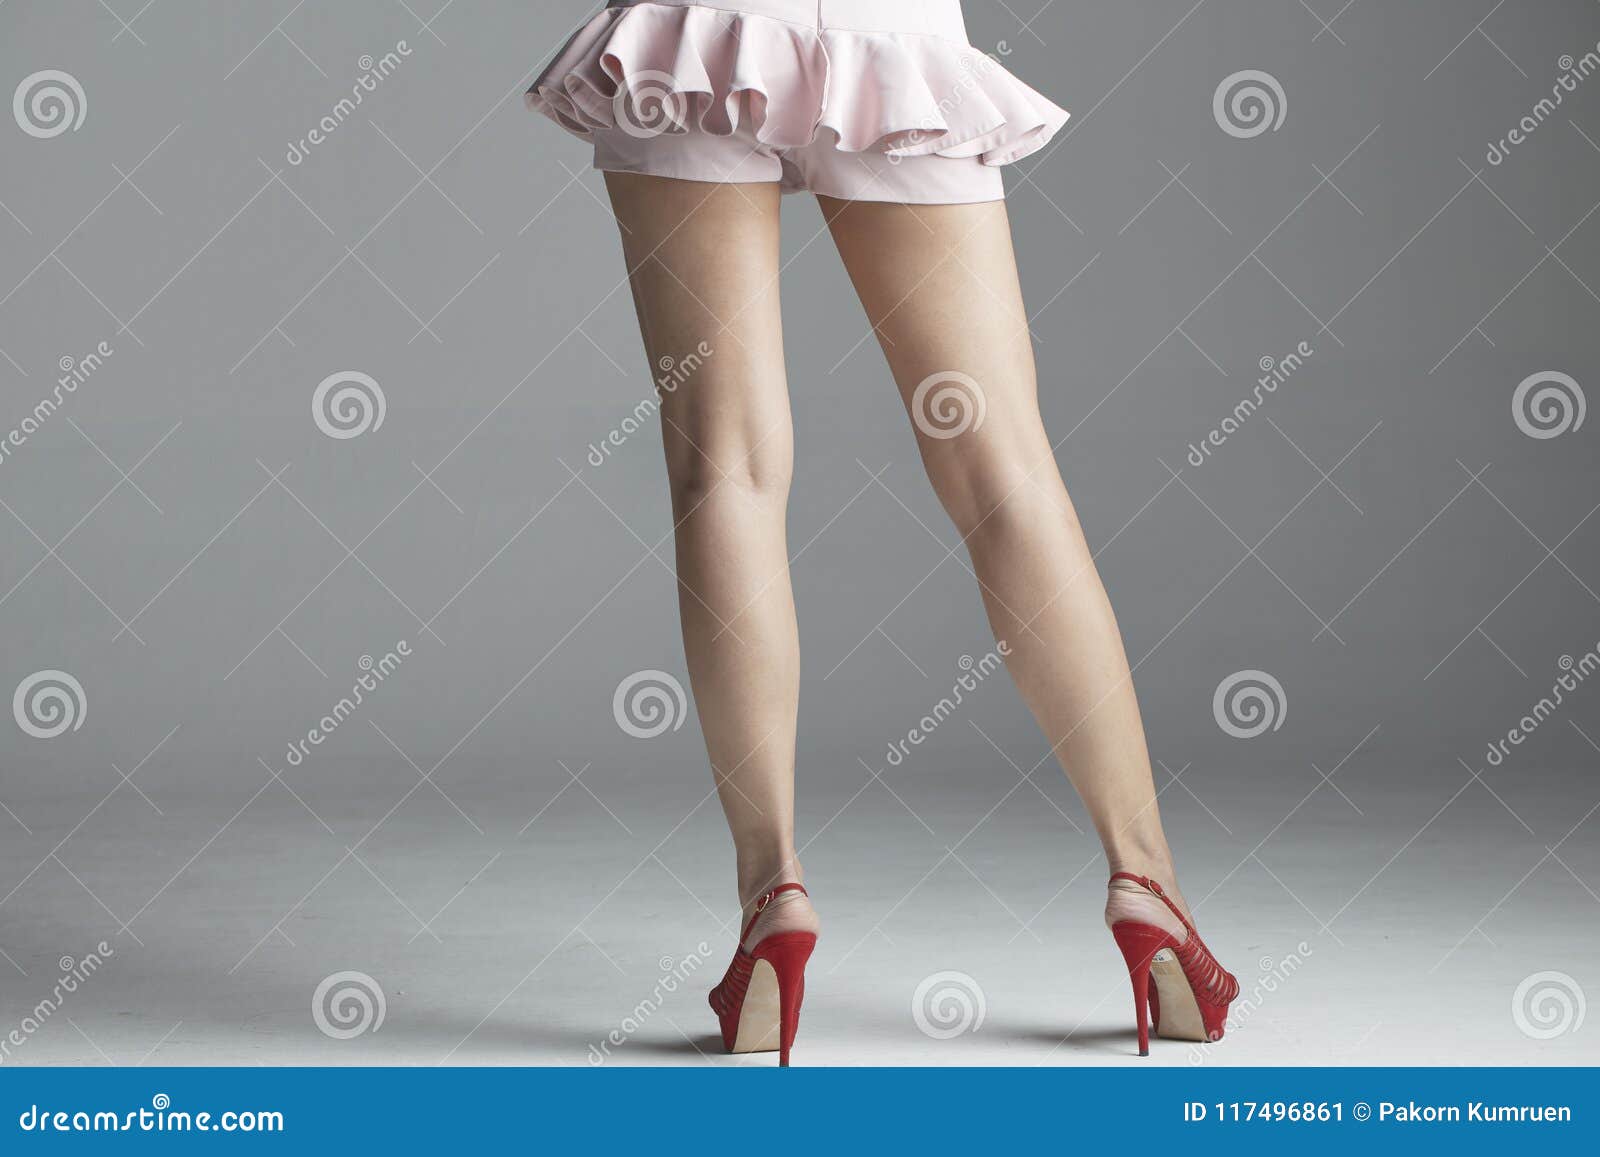 Side View of Young Woman Legs Stock Image - Image of modern, lady ...